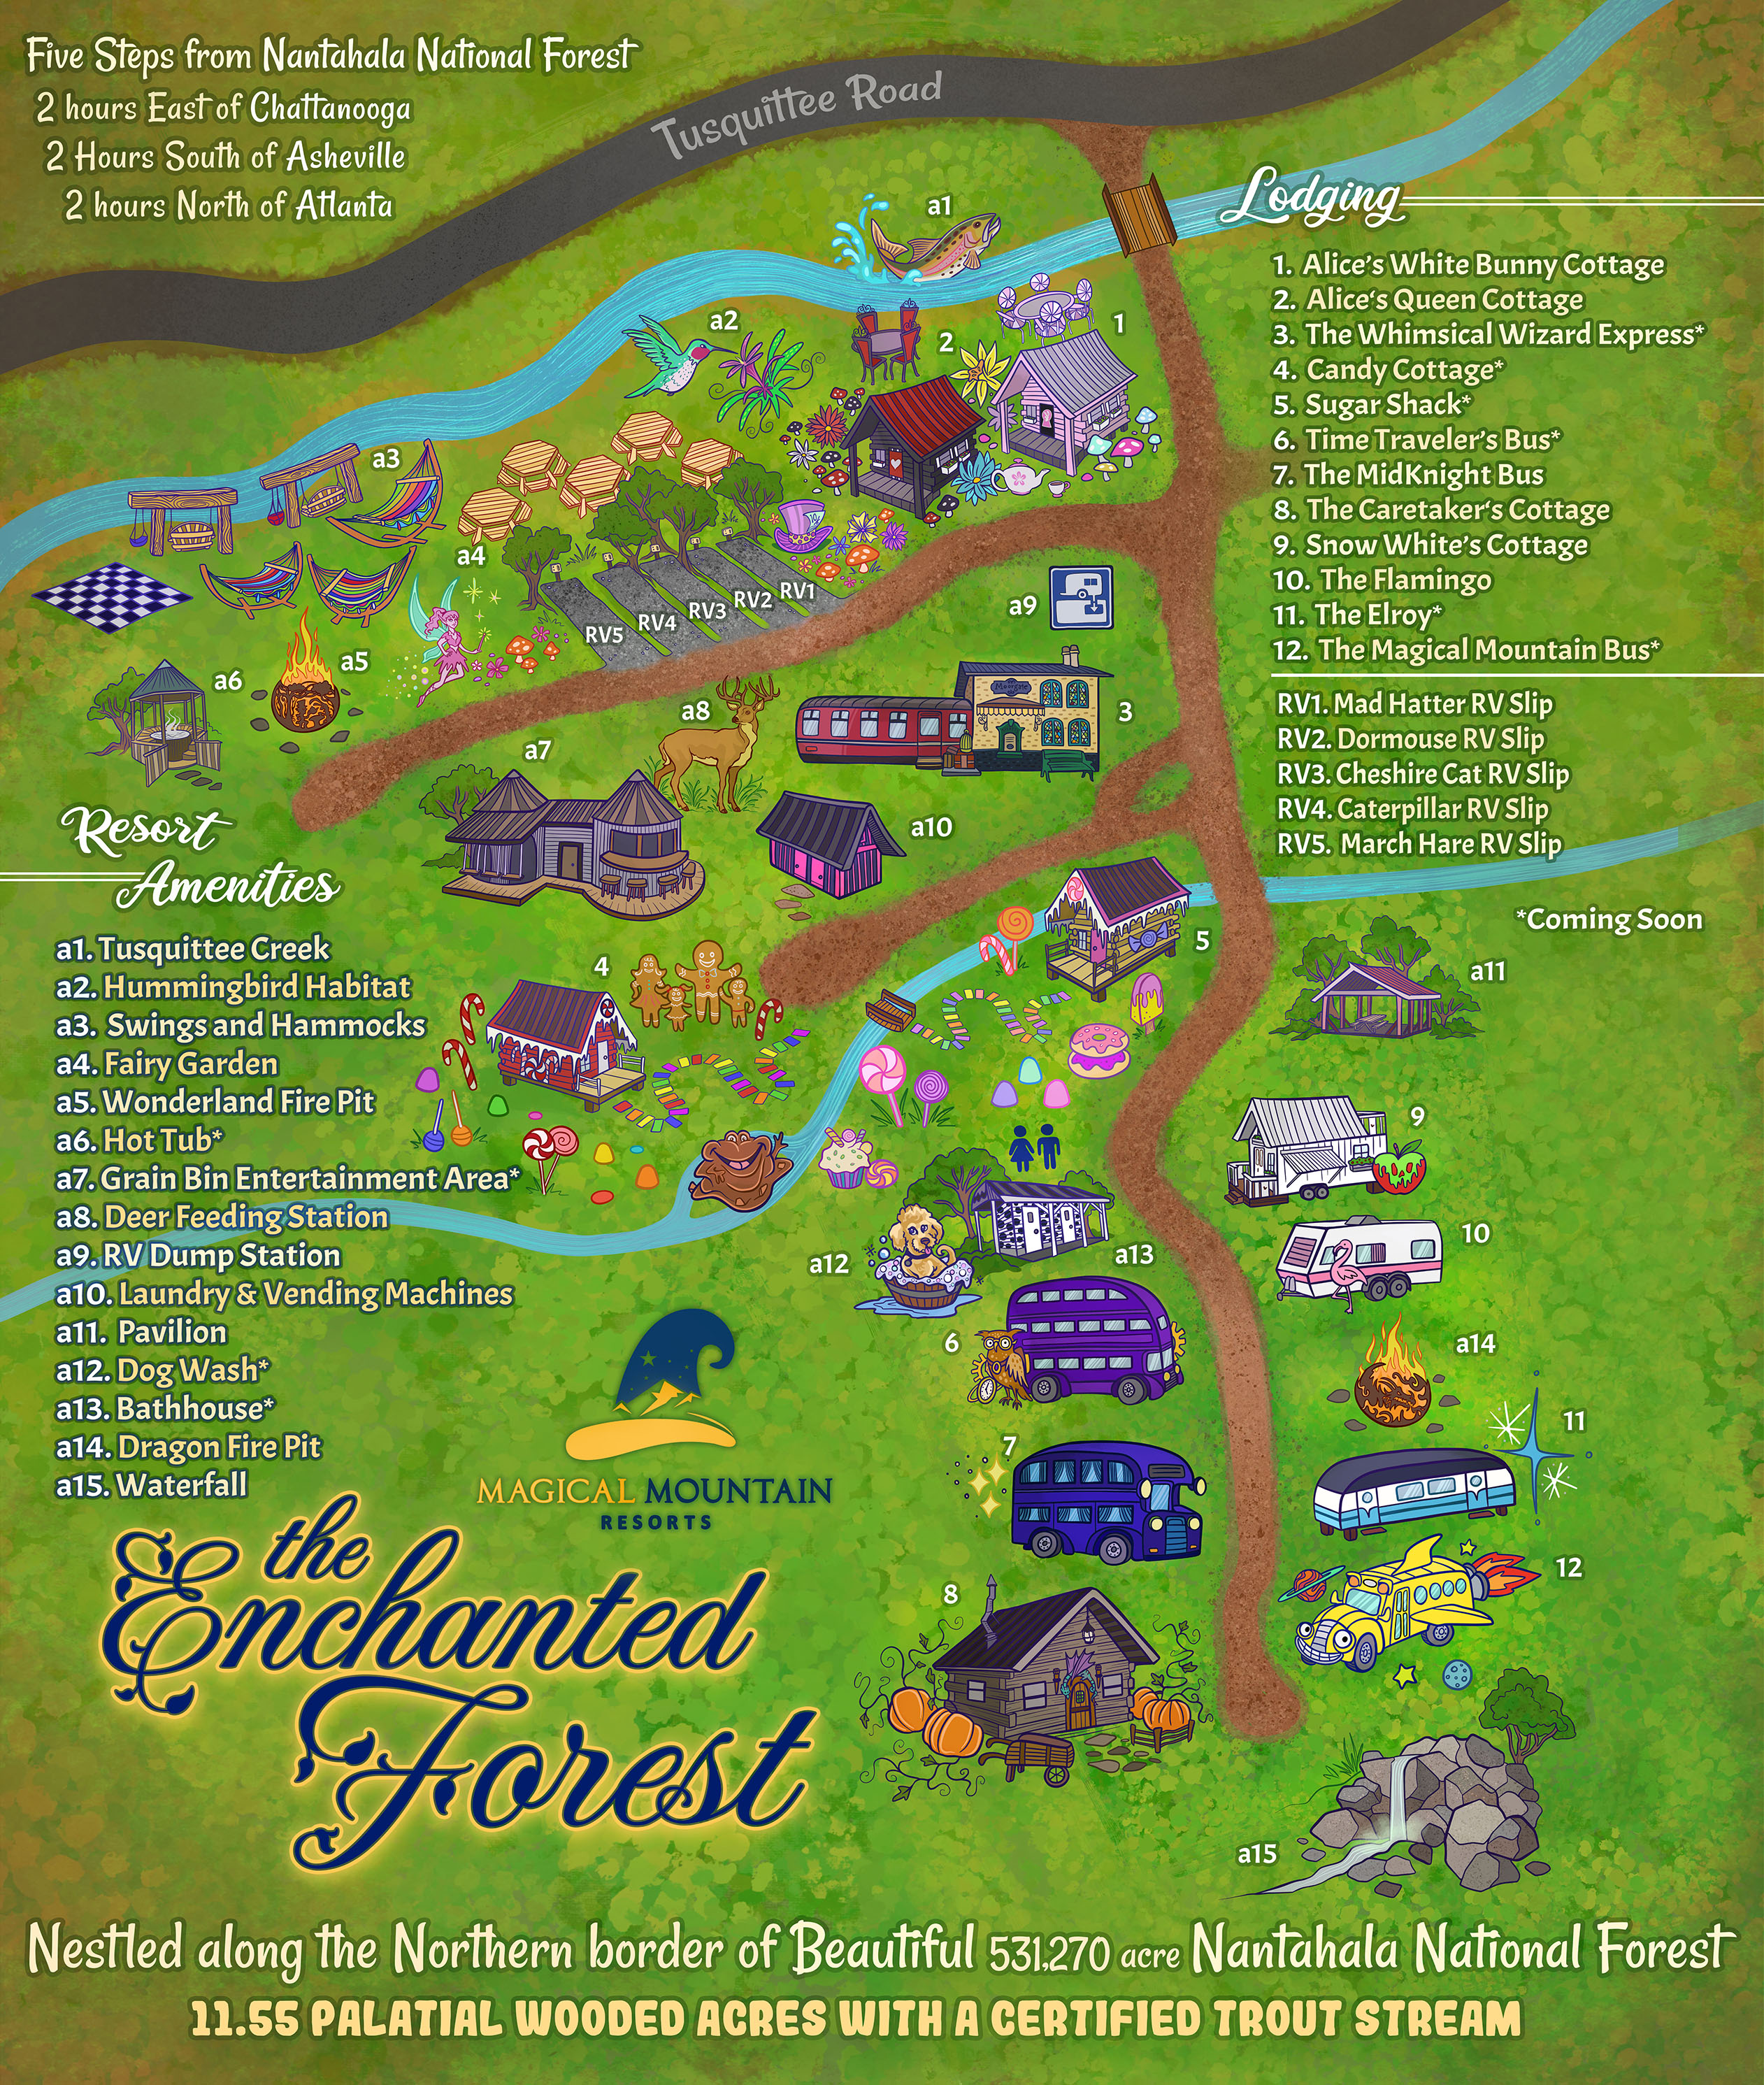 396-enchanted-forest-magical-mountain-resorts-map-jessica-laine-morris-16880571031706.jpg